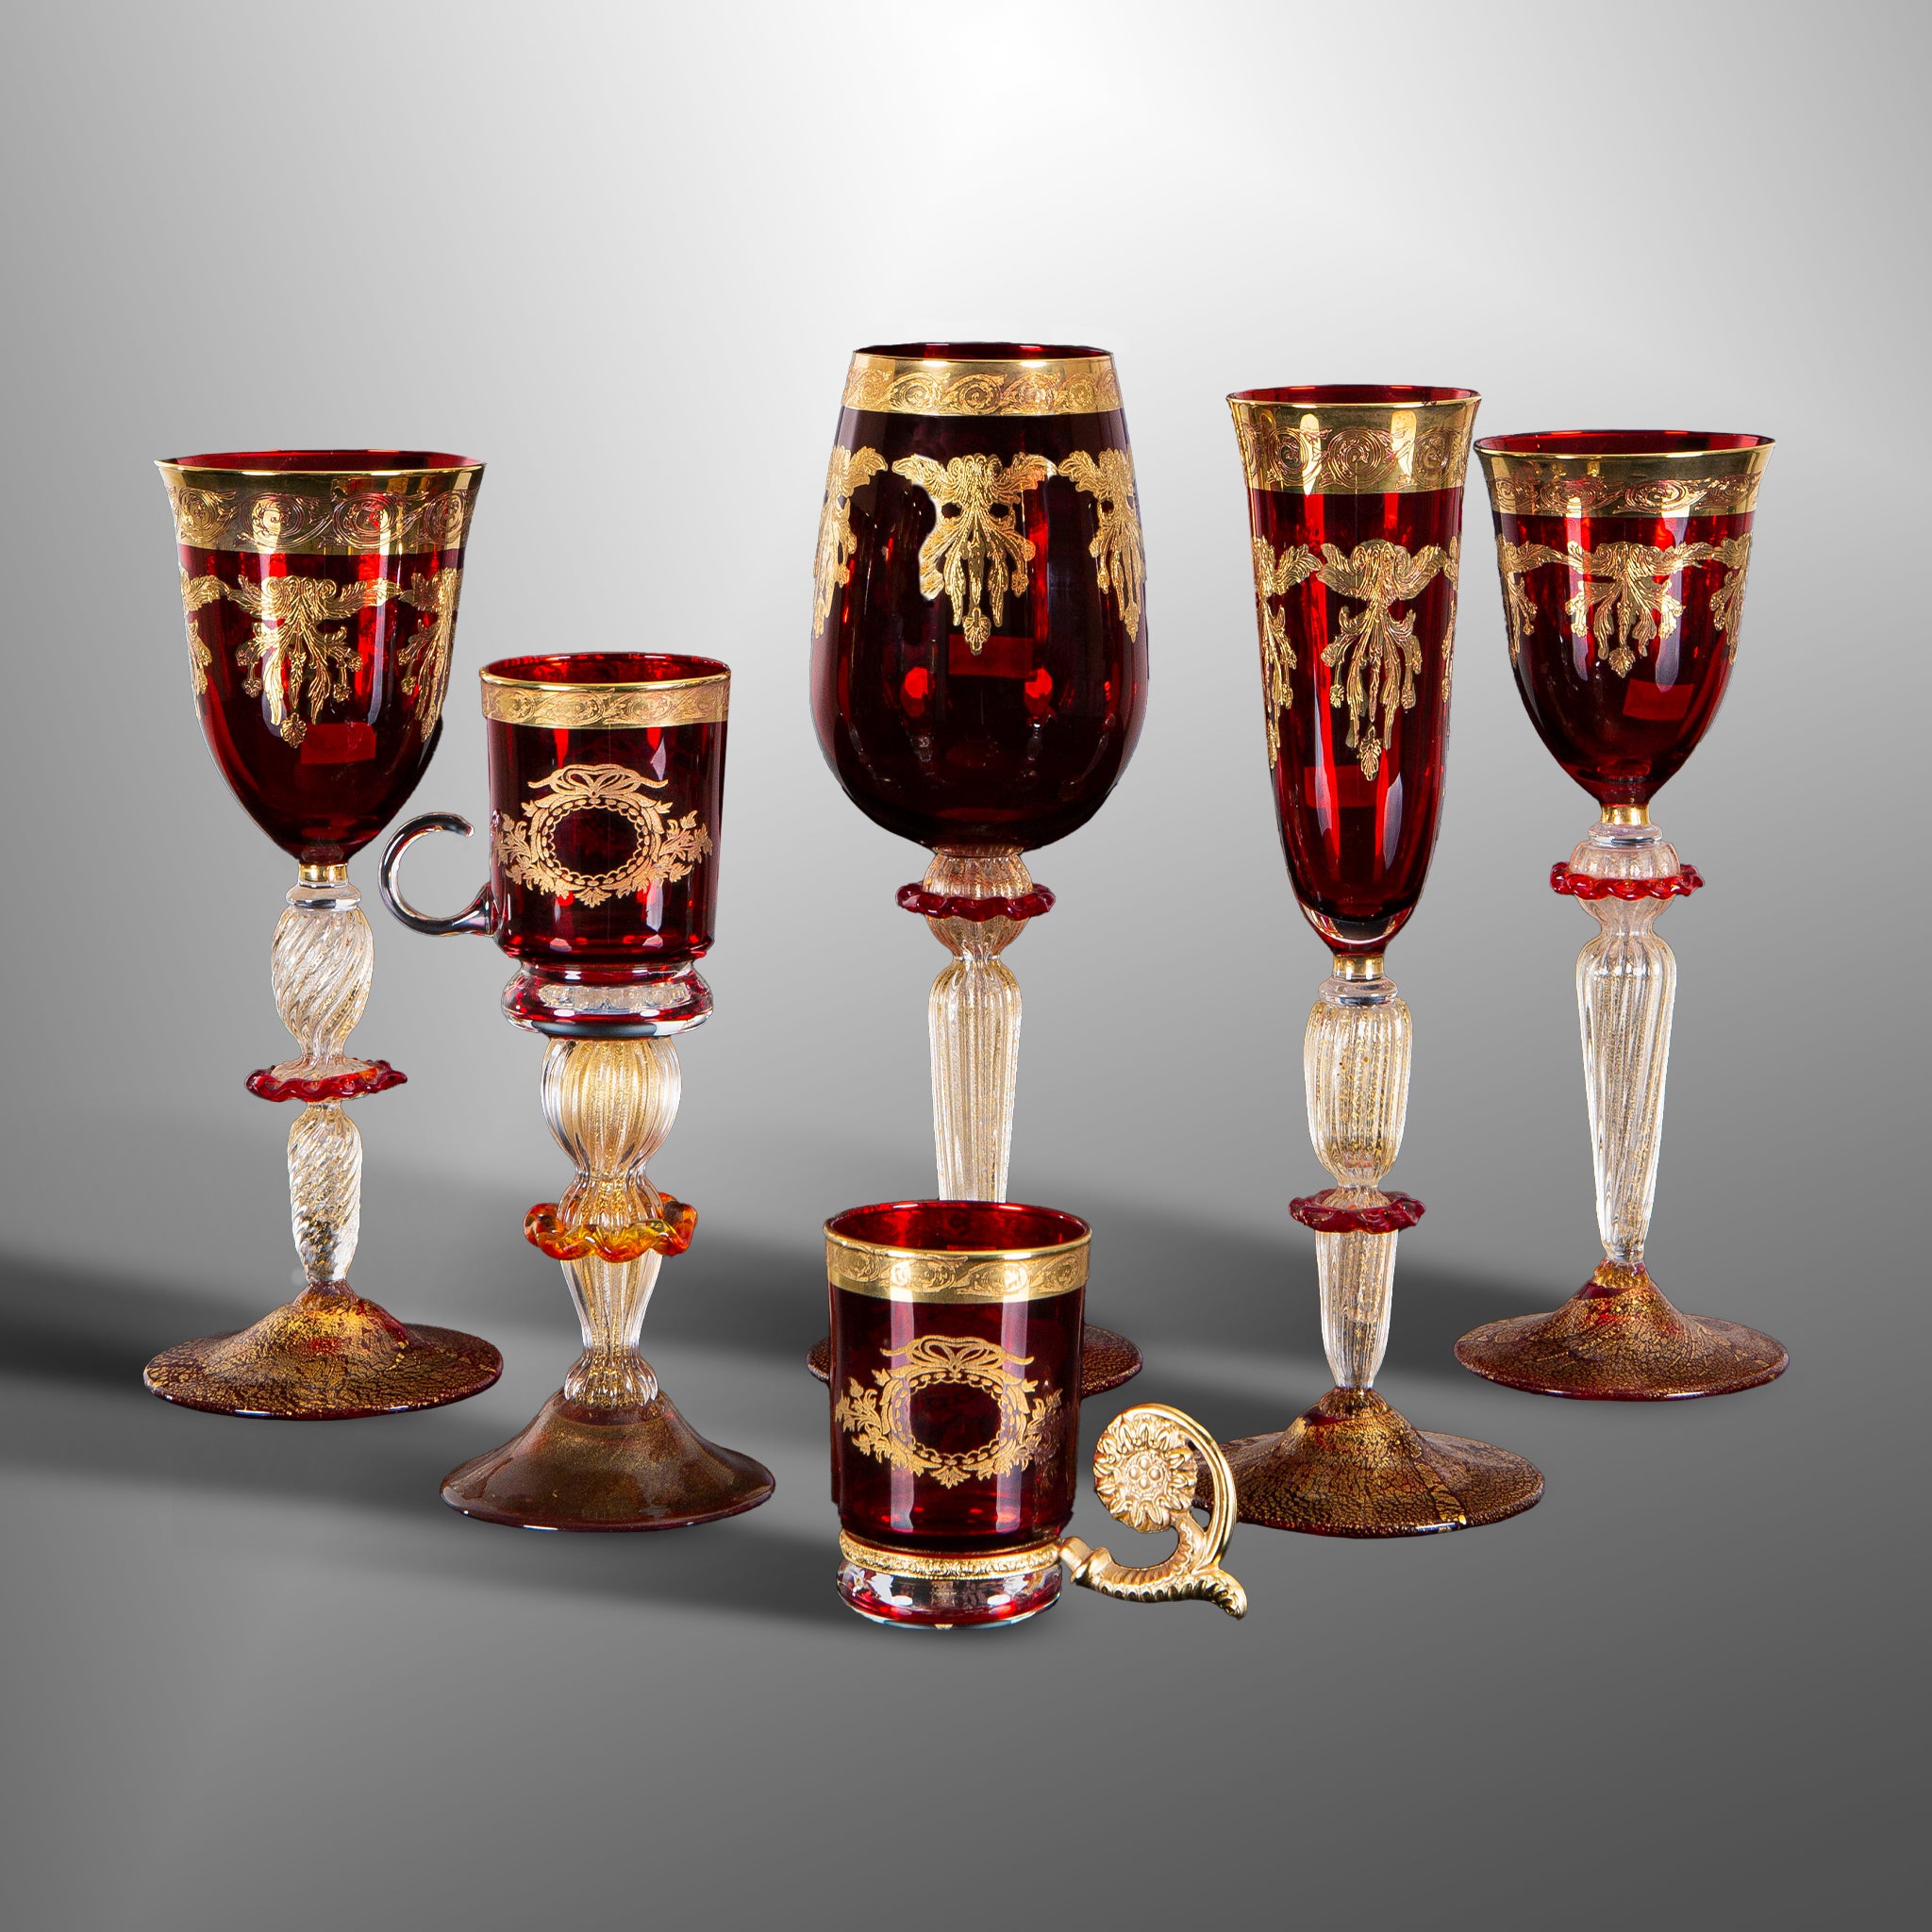 Glasses with gold decorations